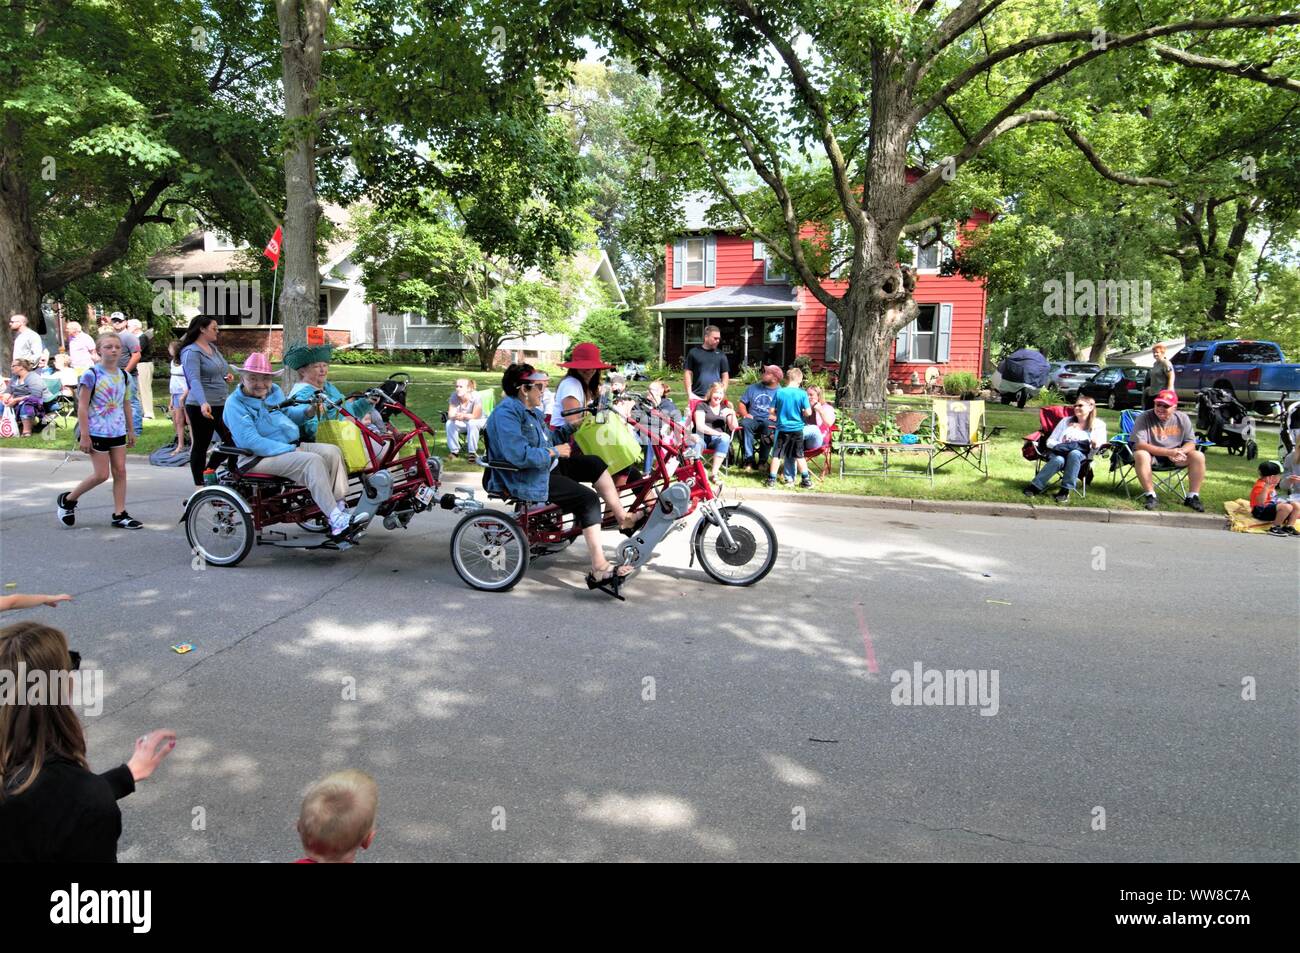 Elderly People Riding Tricycles in Small-Town America Parade Stock Photo